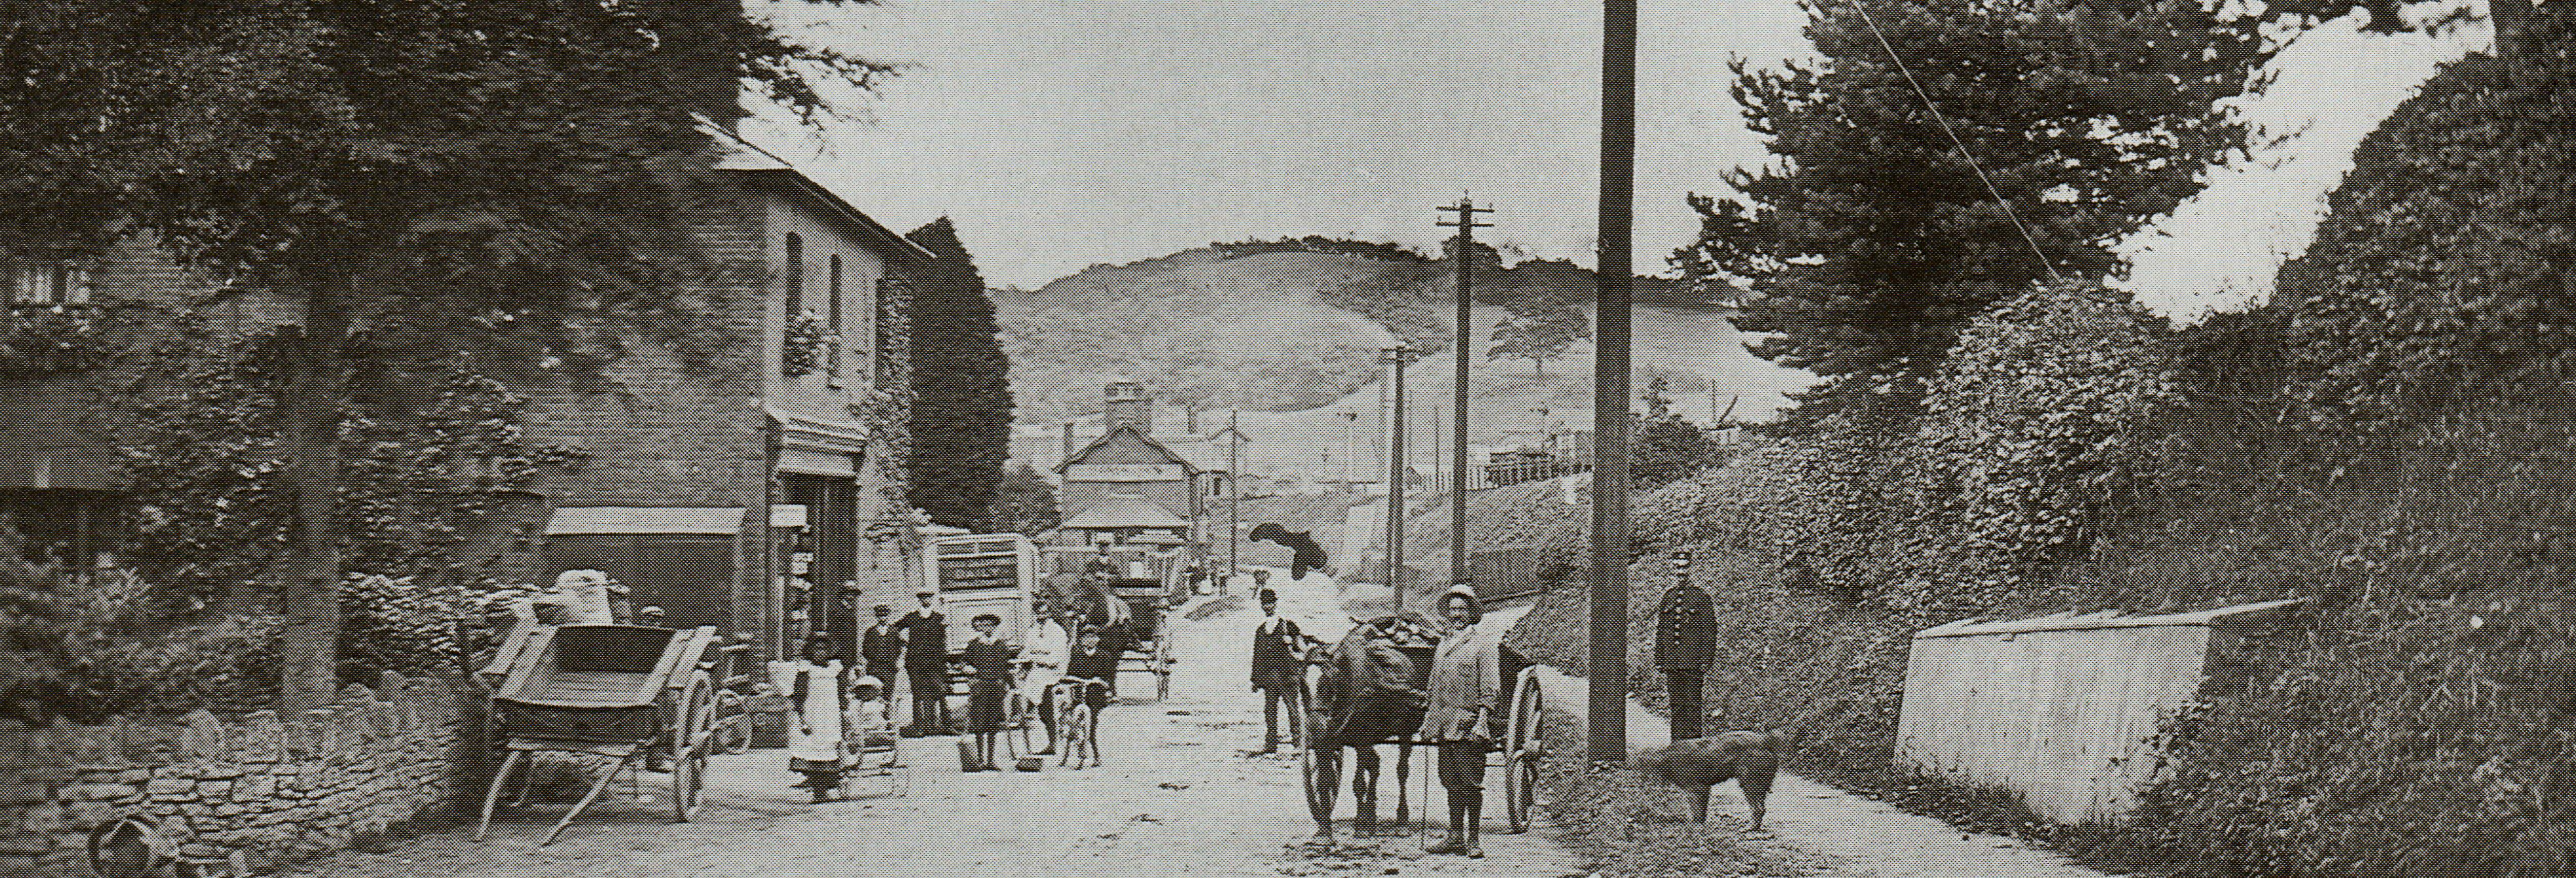 Pontrilas Village view in the early 20th Century